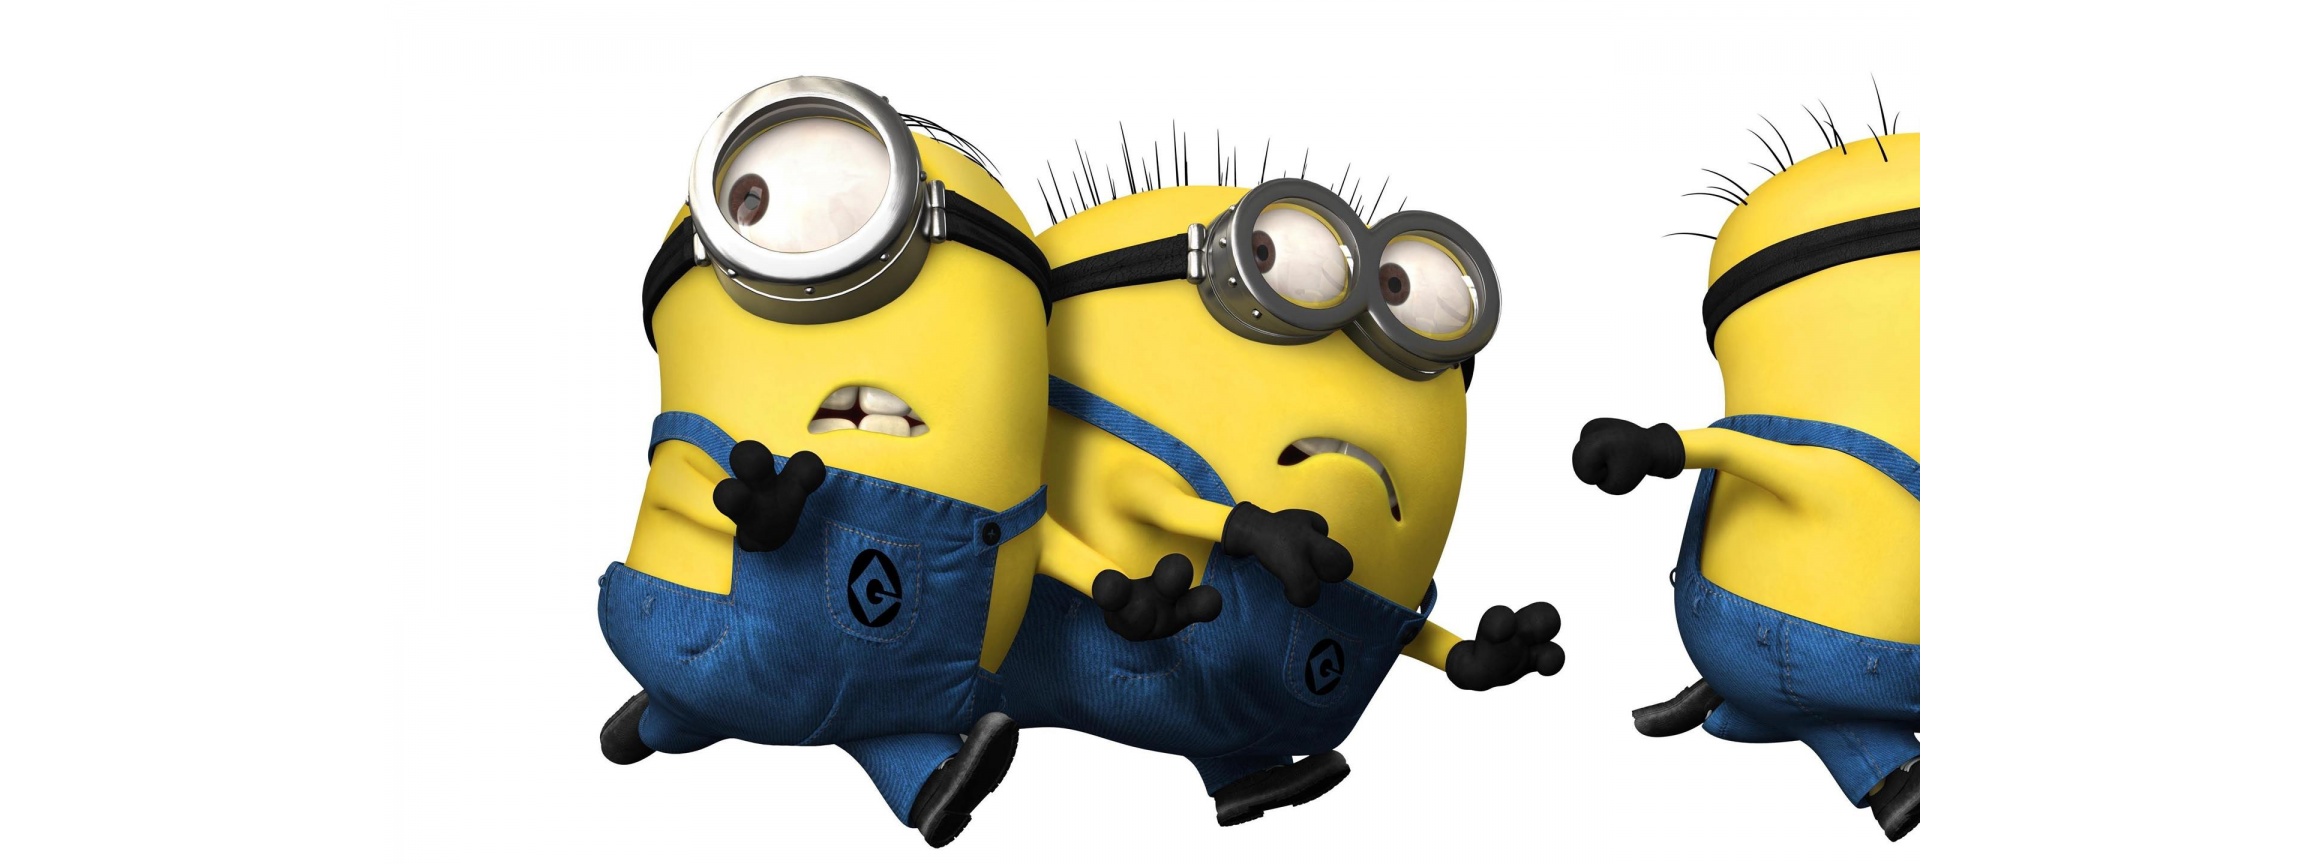 Selected Resoloution Wallpaper HD Minions Size